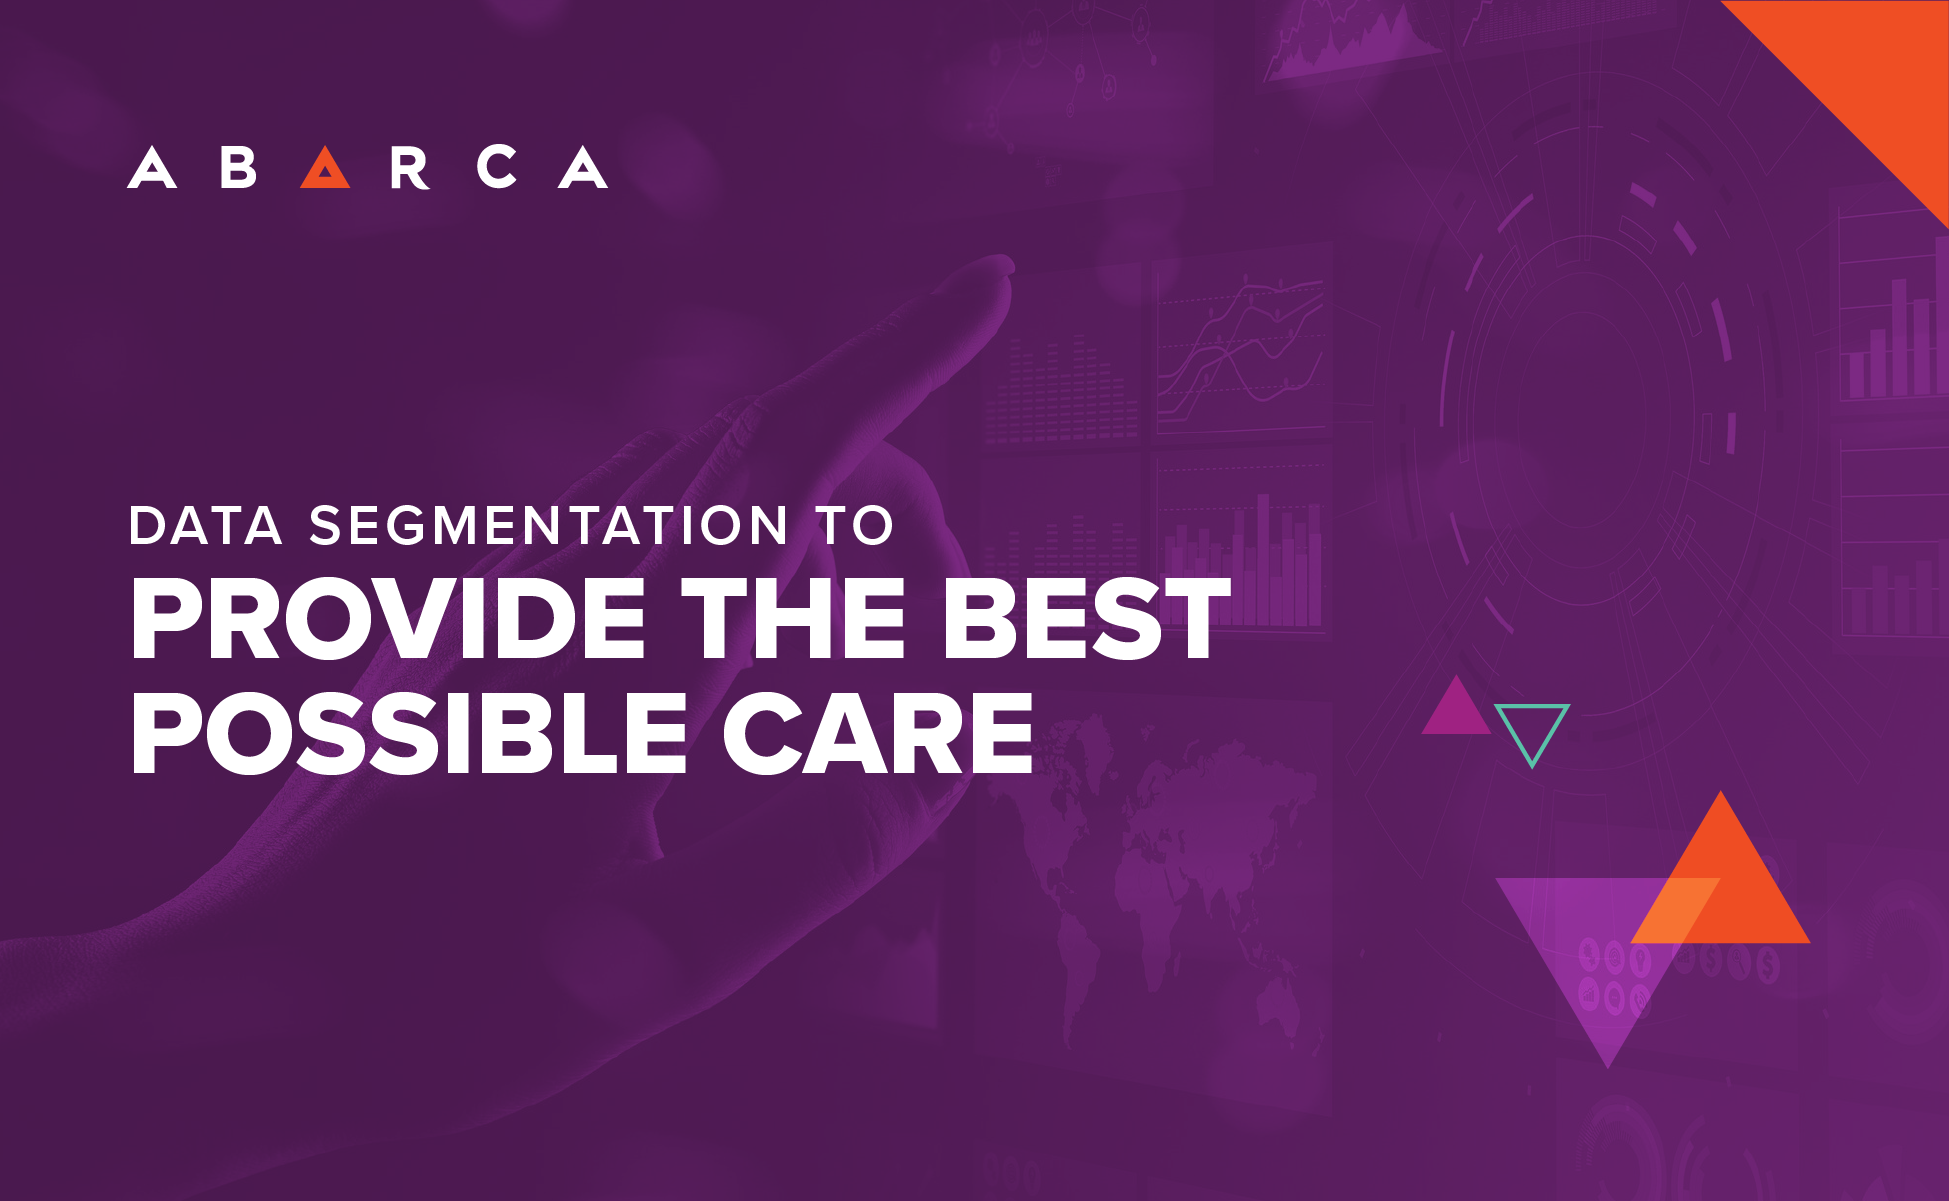 Abarca Health: Data segmentation for the best possible care